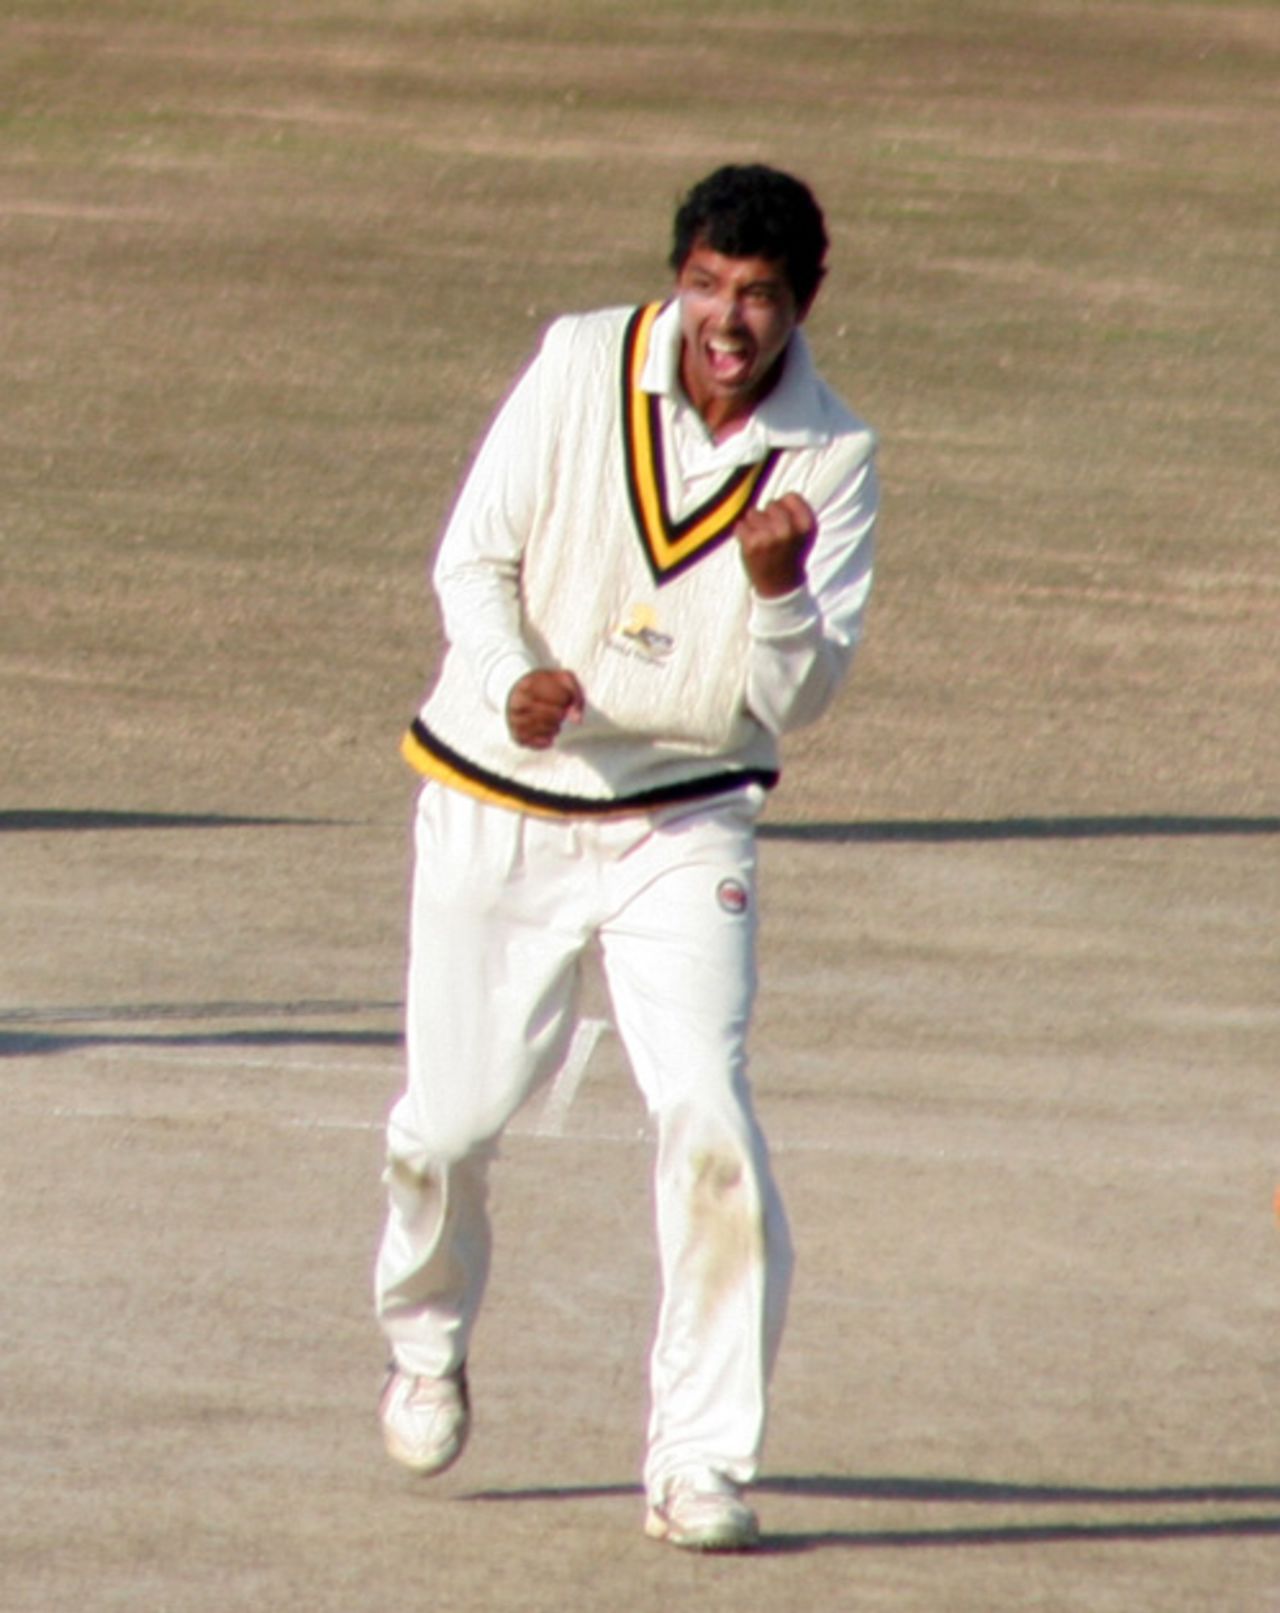 Vishal Bhatia exults after claiming a wicket, Himachal Pradesh v Rajasthan, Ranji Trophy Super League, Group A, 7th round, 2nd day, Dharamsala, December 26, 2007 